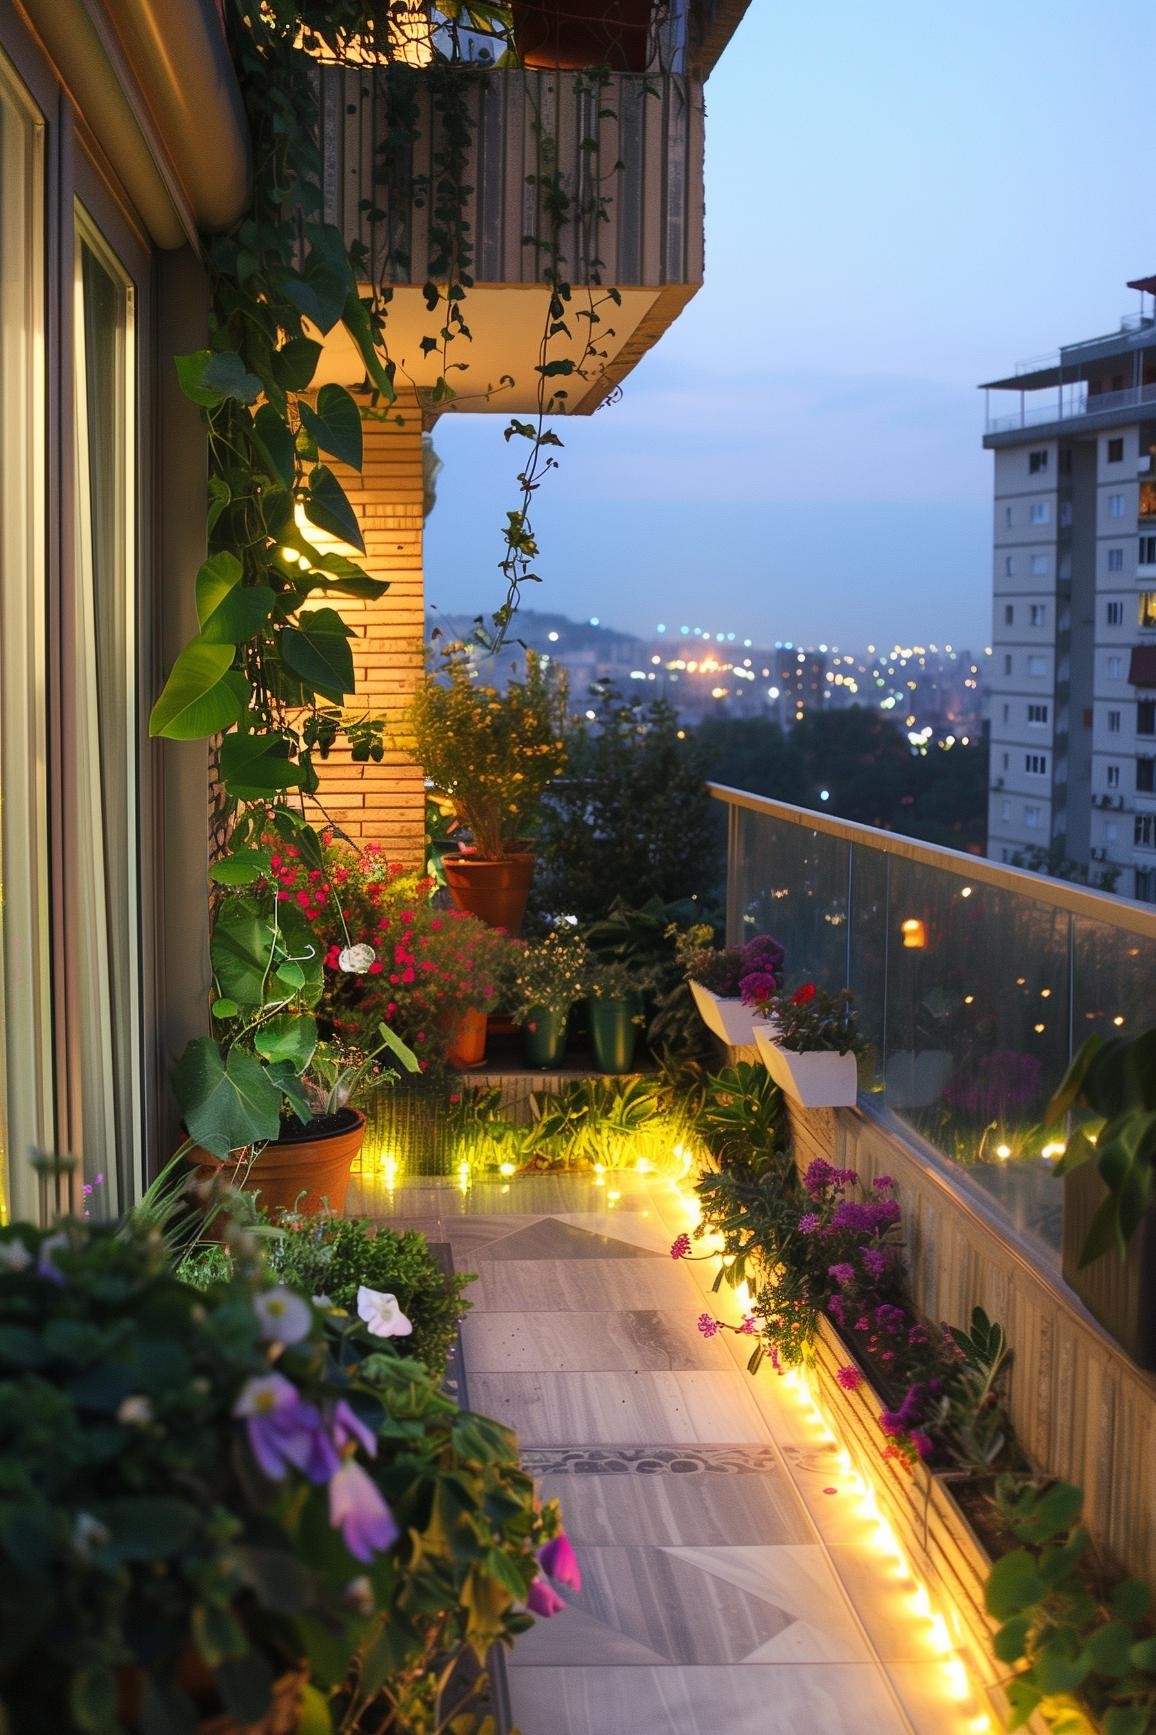 Solar-Powered Garden Lights for Nighttime Ambiance